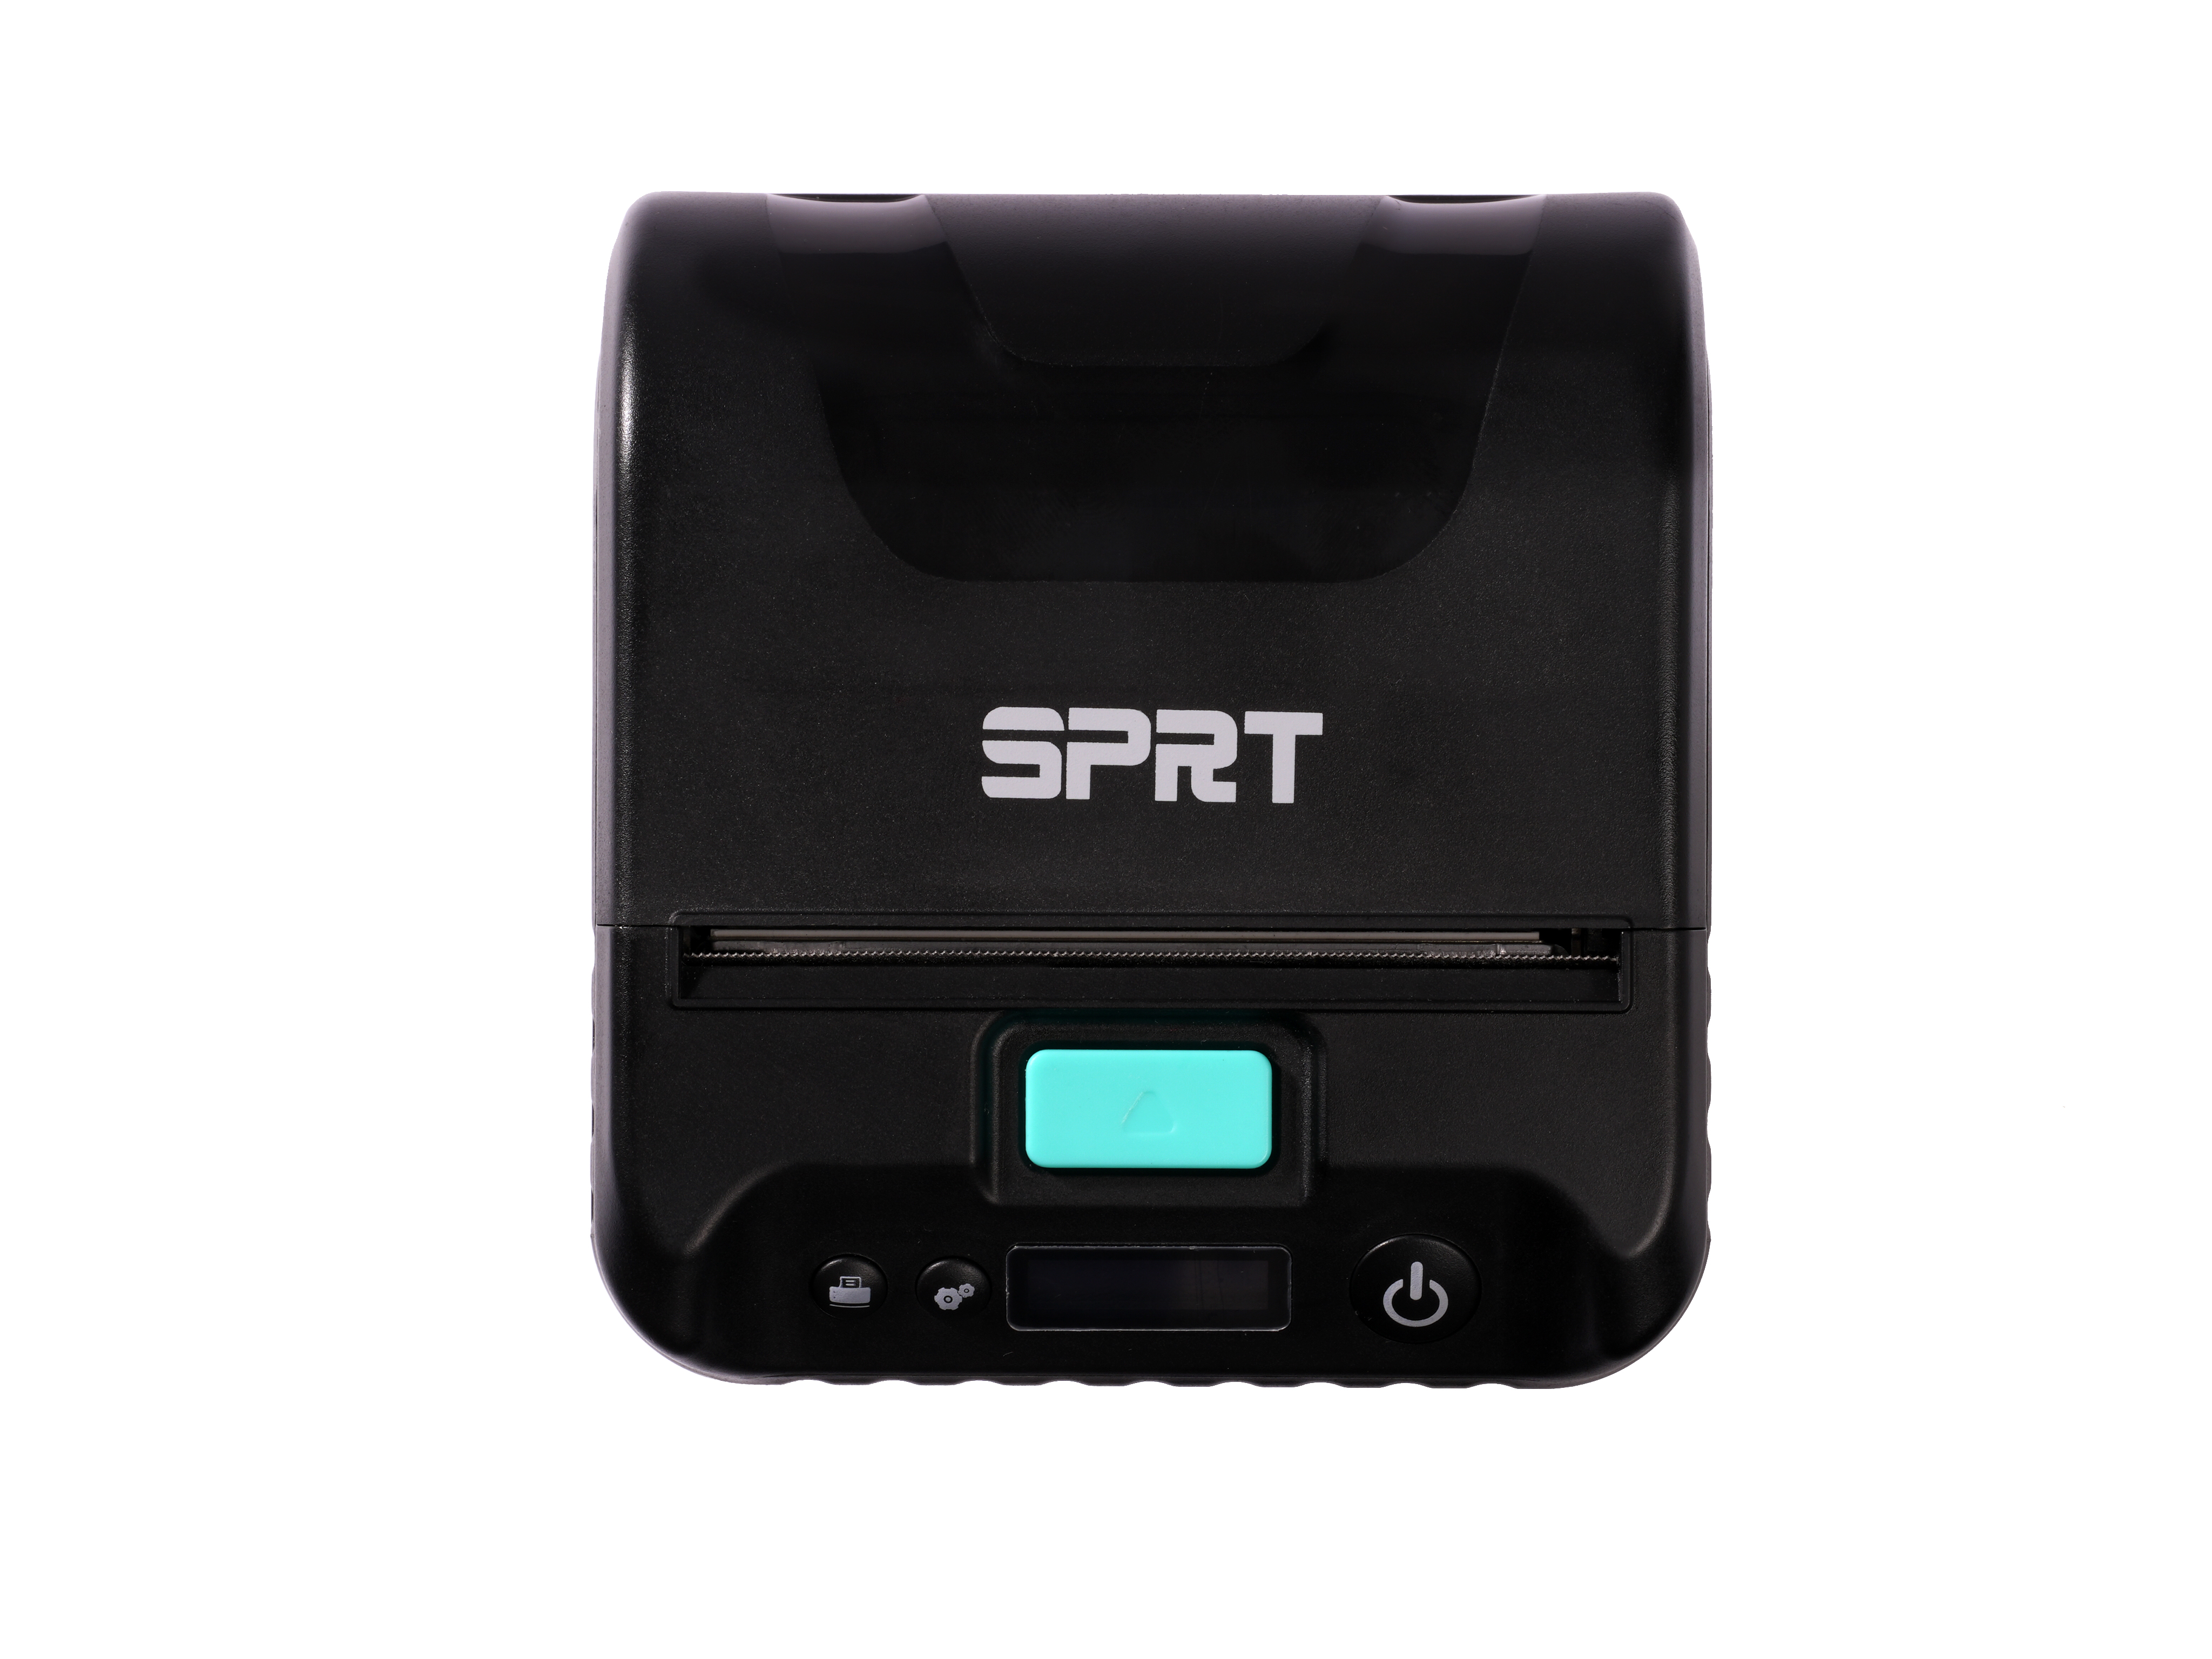 80mm Portable Label printer SP-L39 with Bluetooth